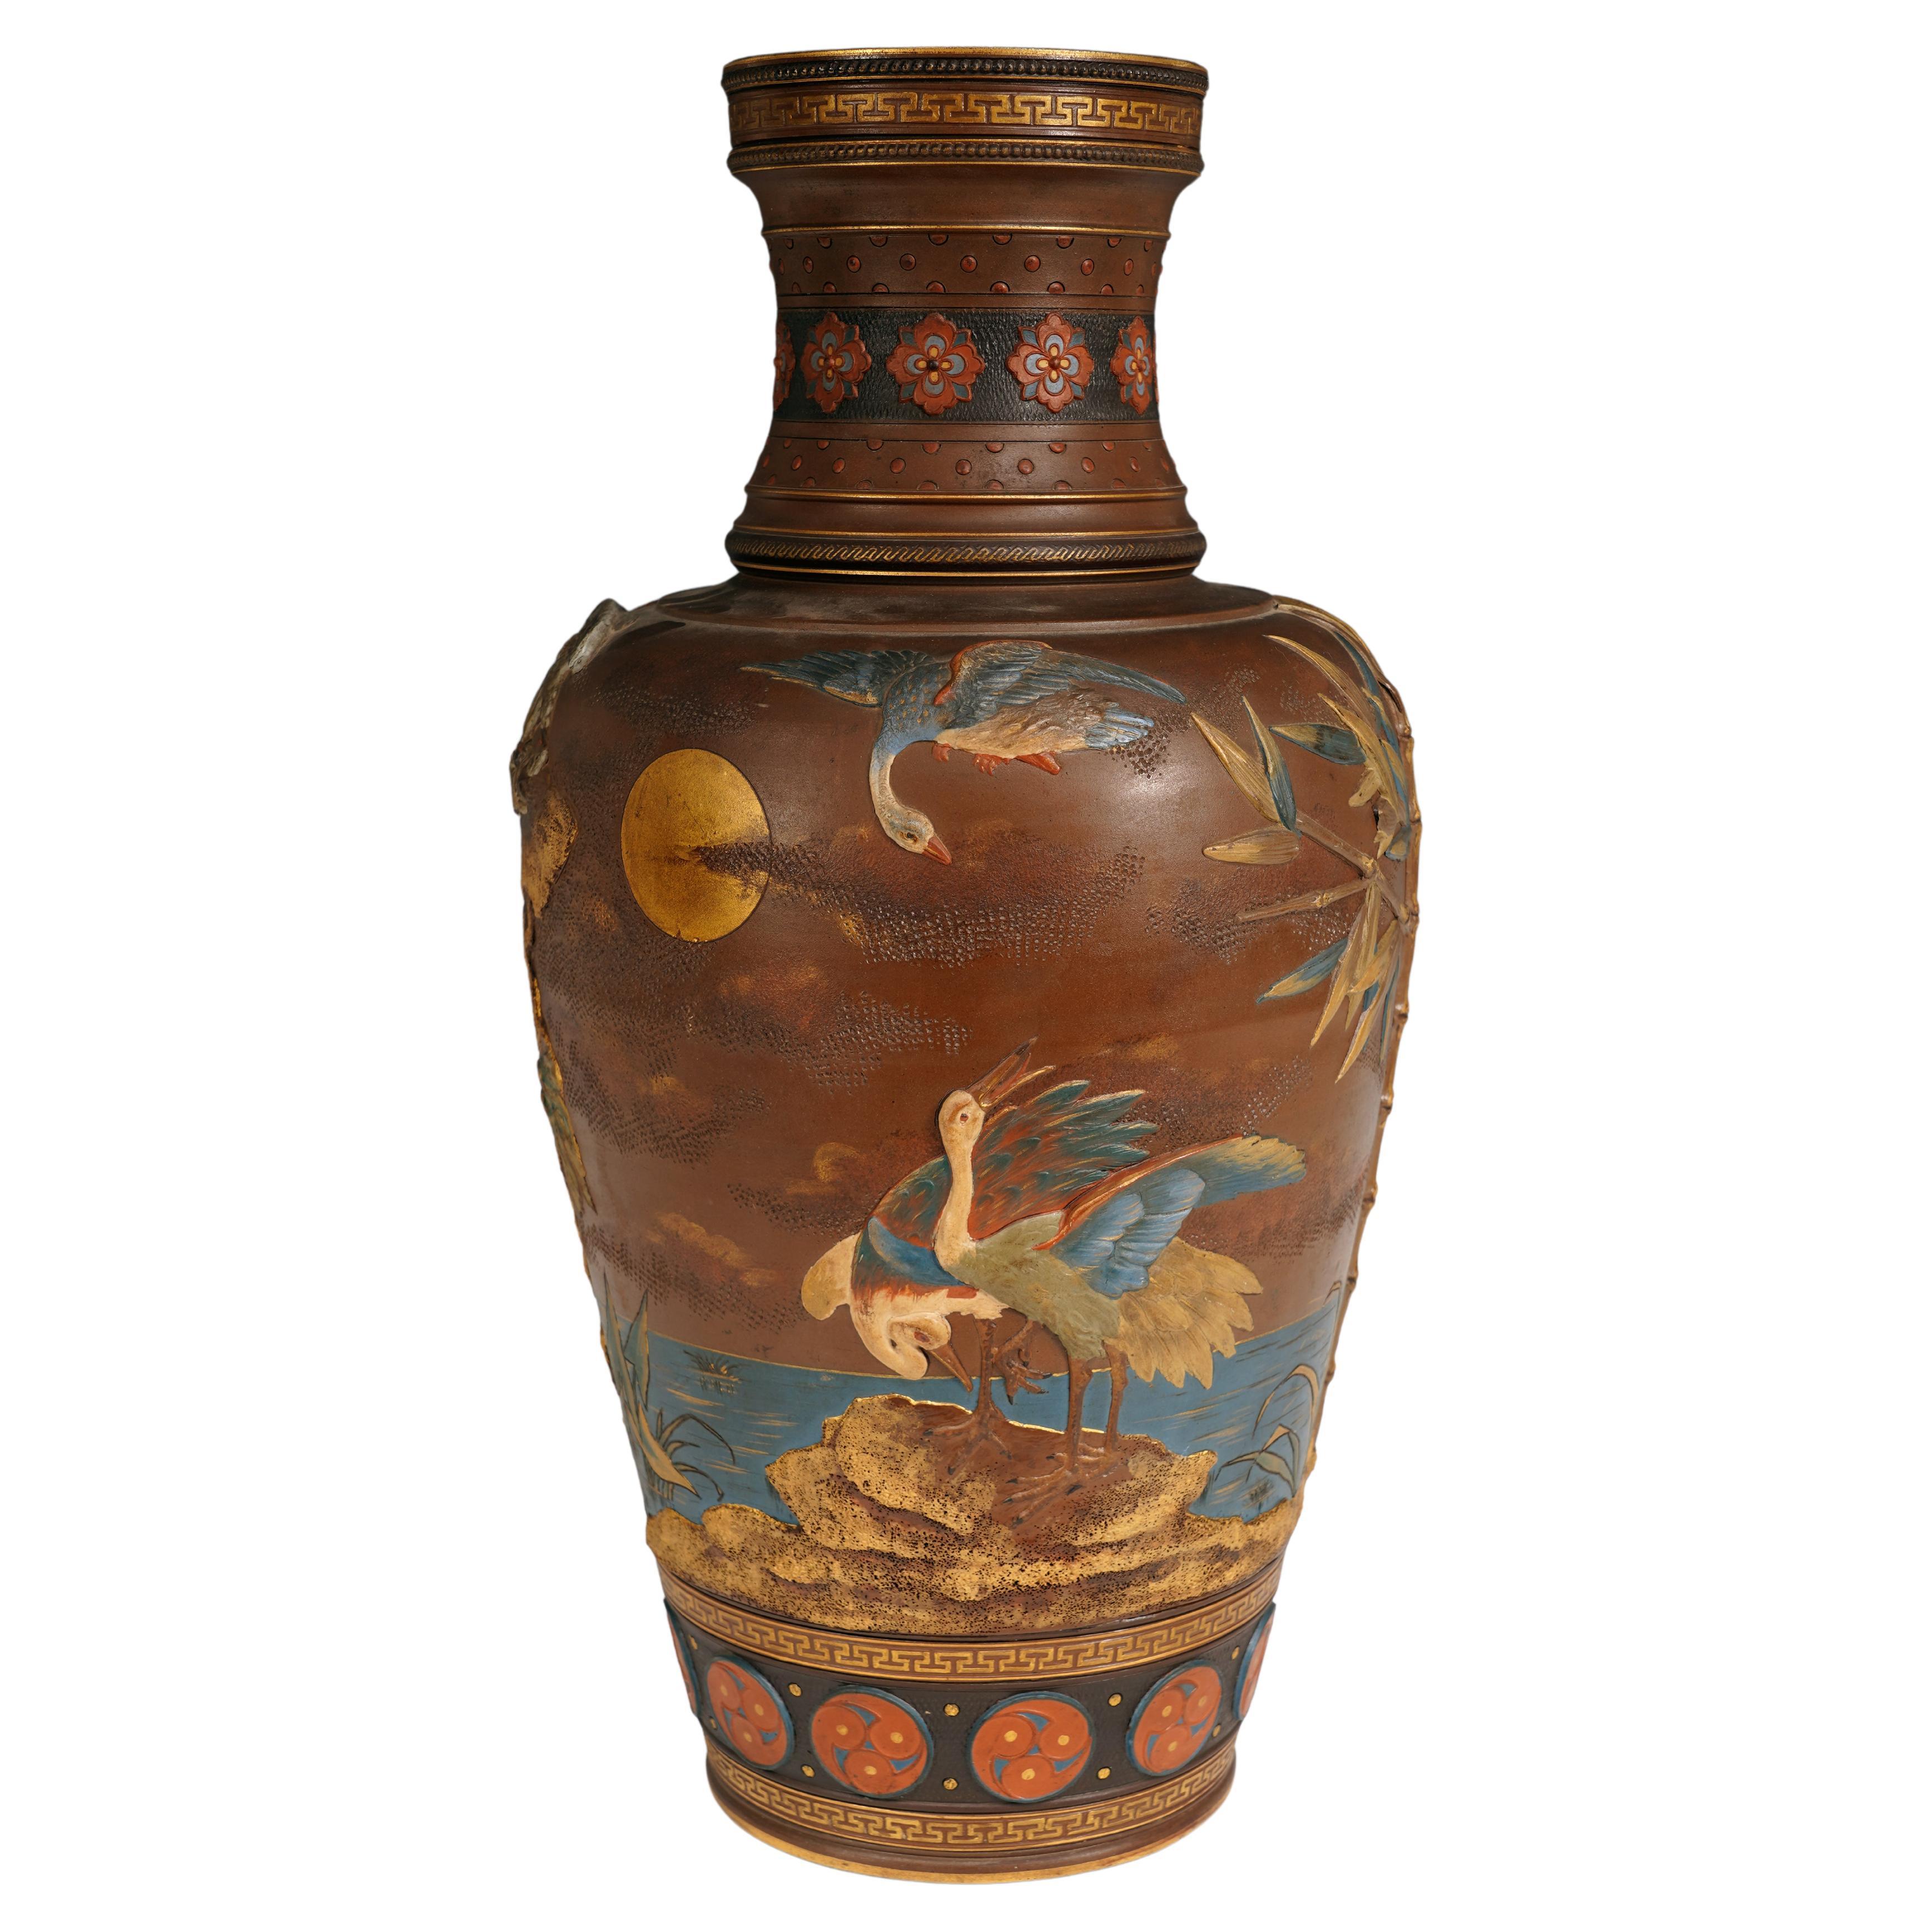 Vase with Cranes by the Villeroy&Boch Manufacture, Mettlach Germany, Circa 1900